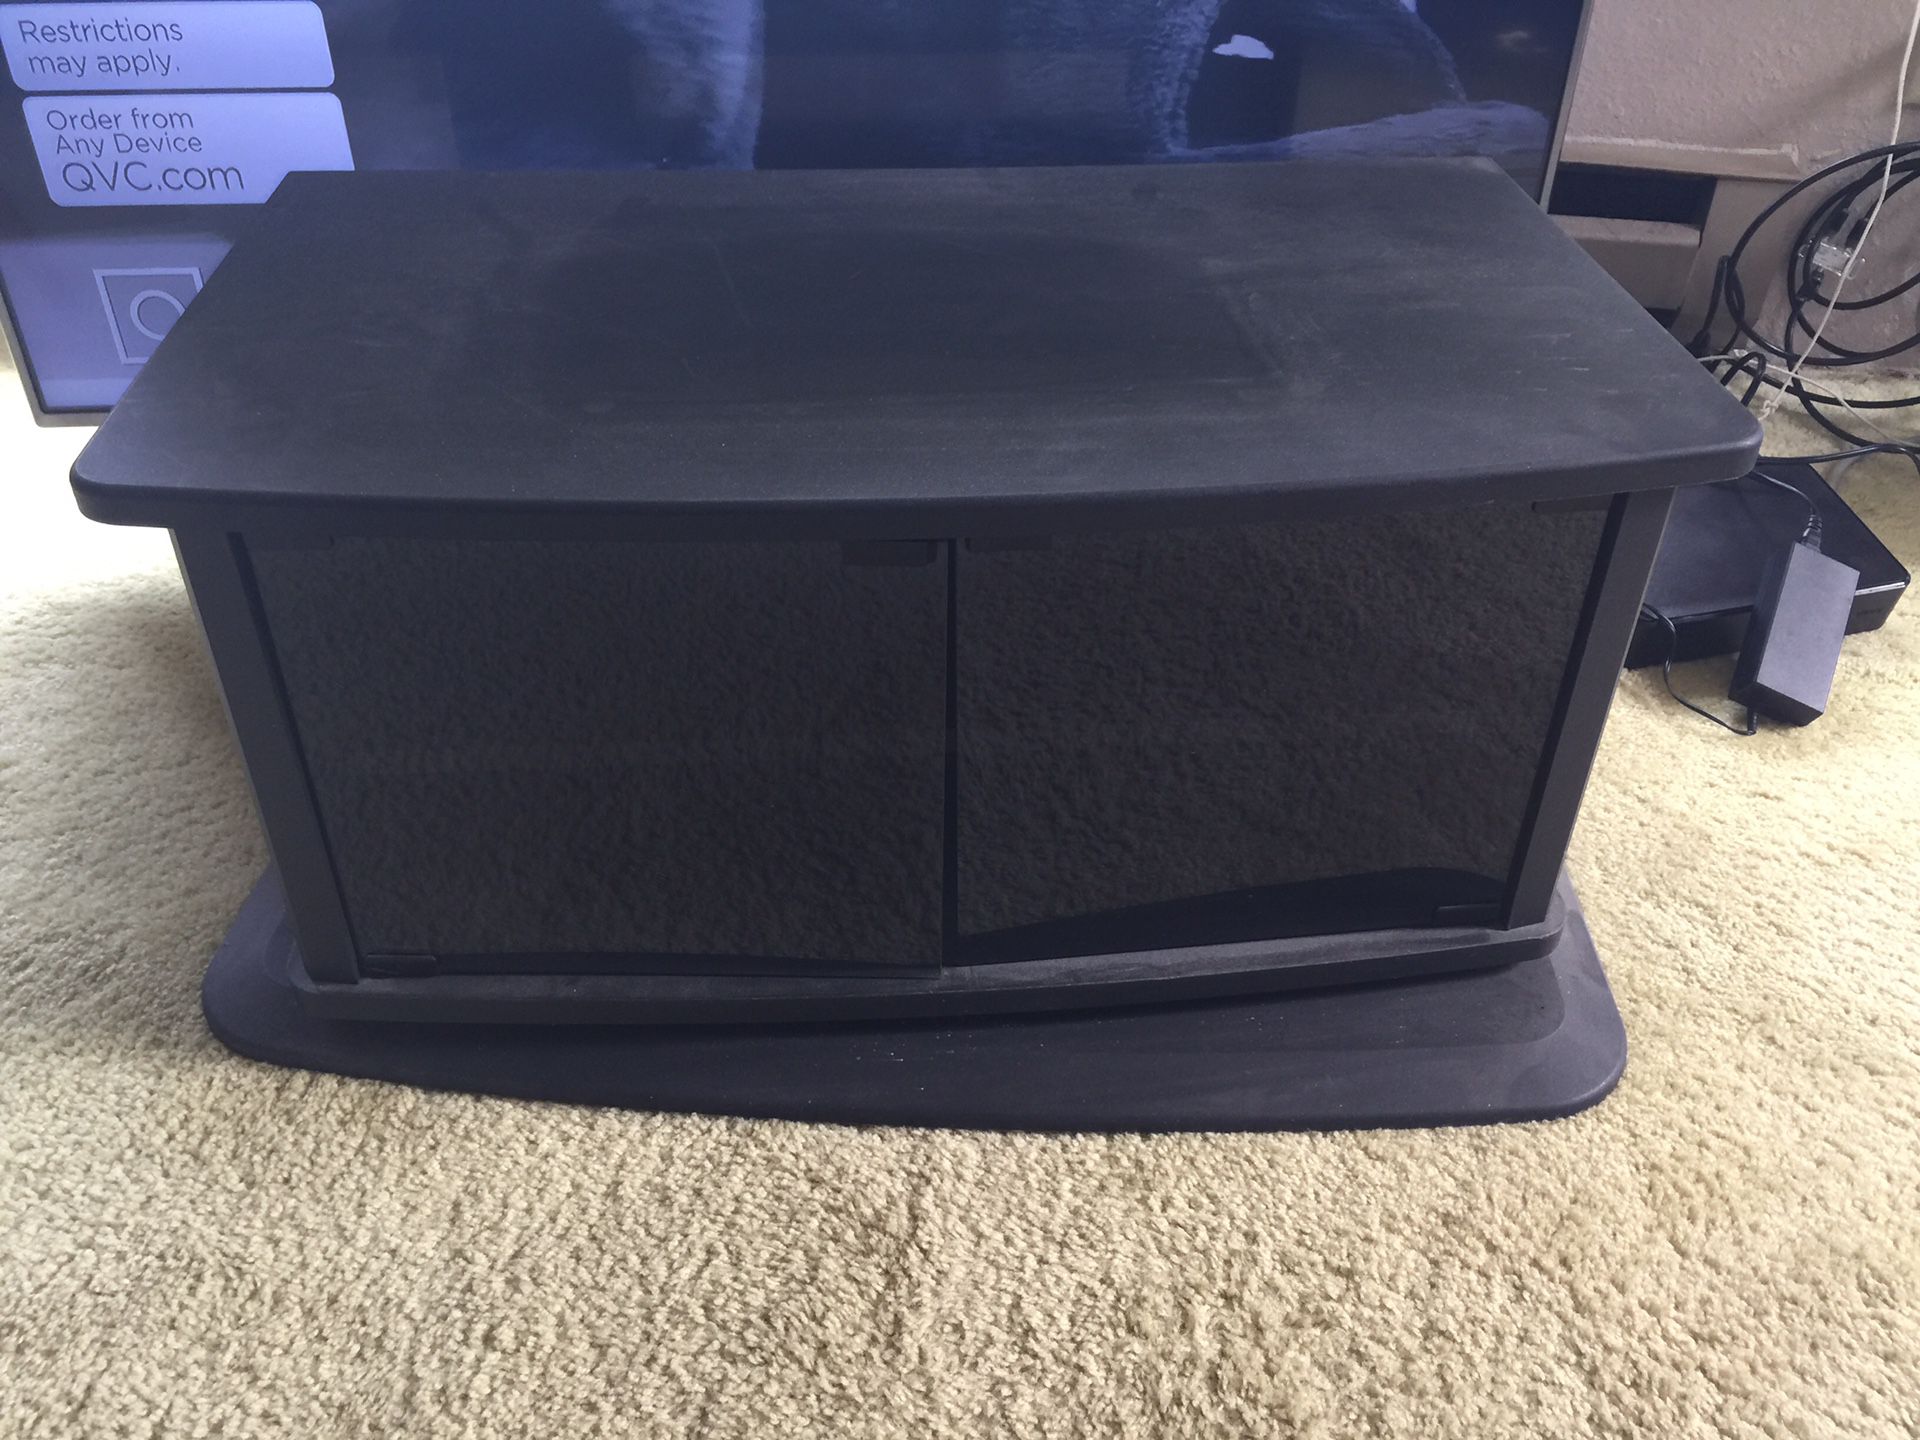 Swivel base tv stand, glass doors open to hold DVD player and tapes